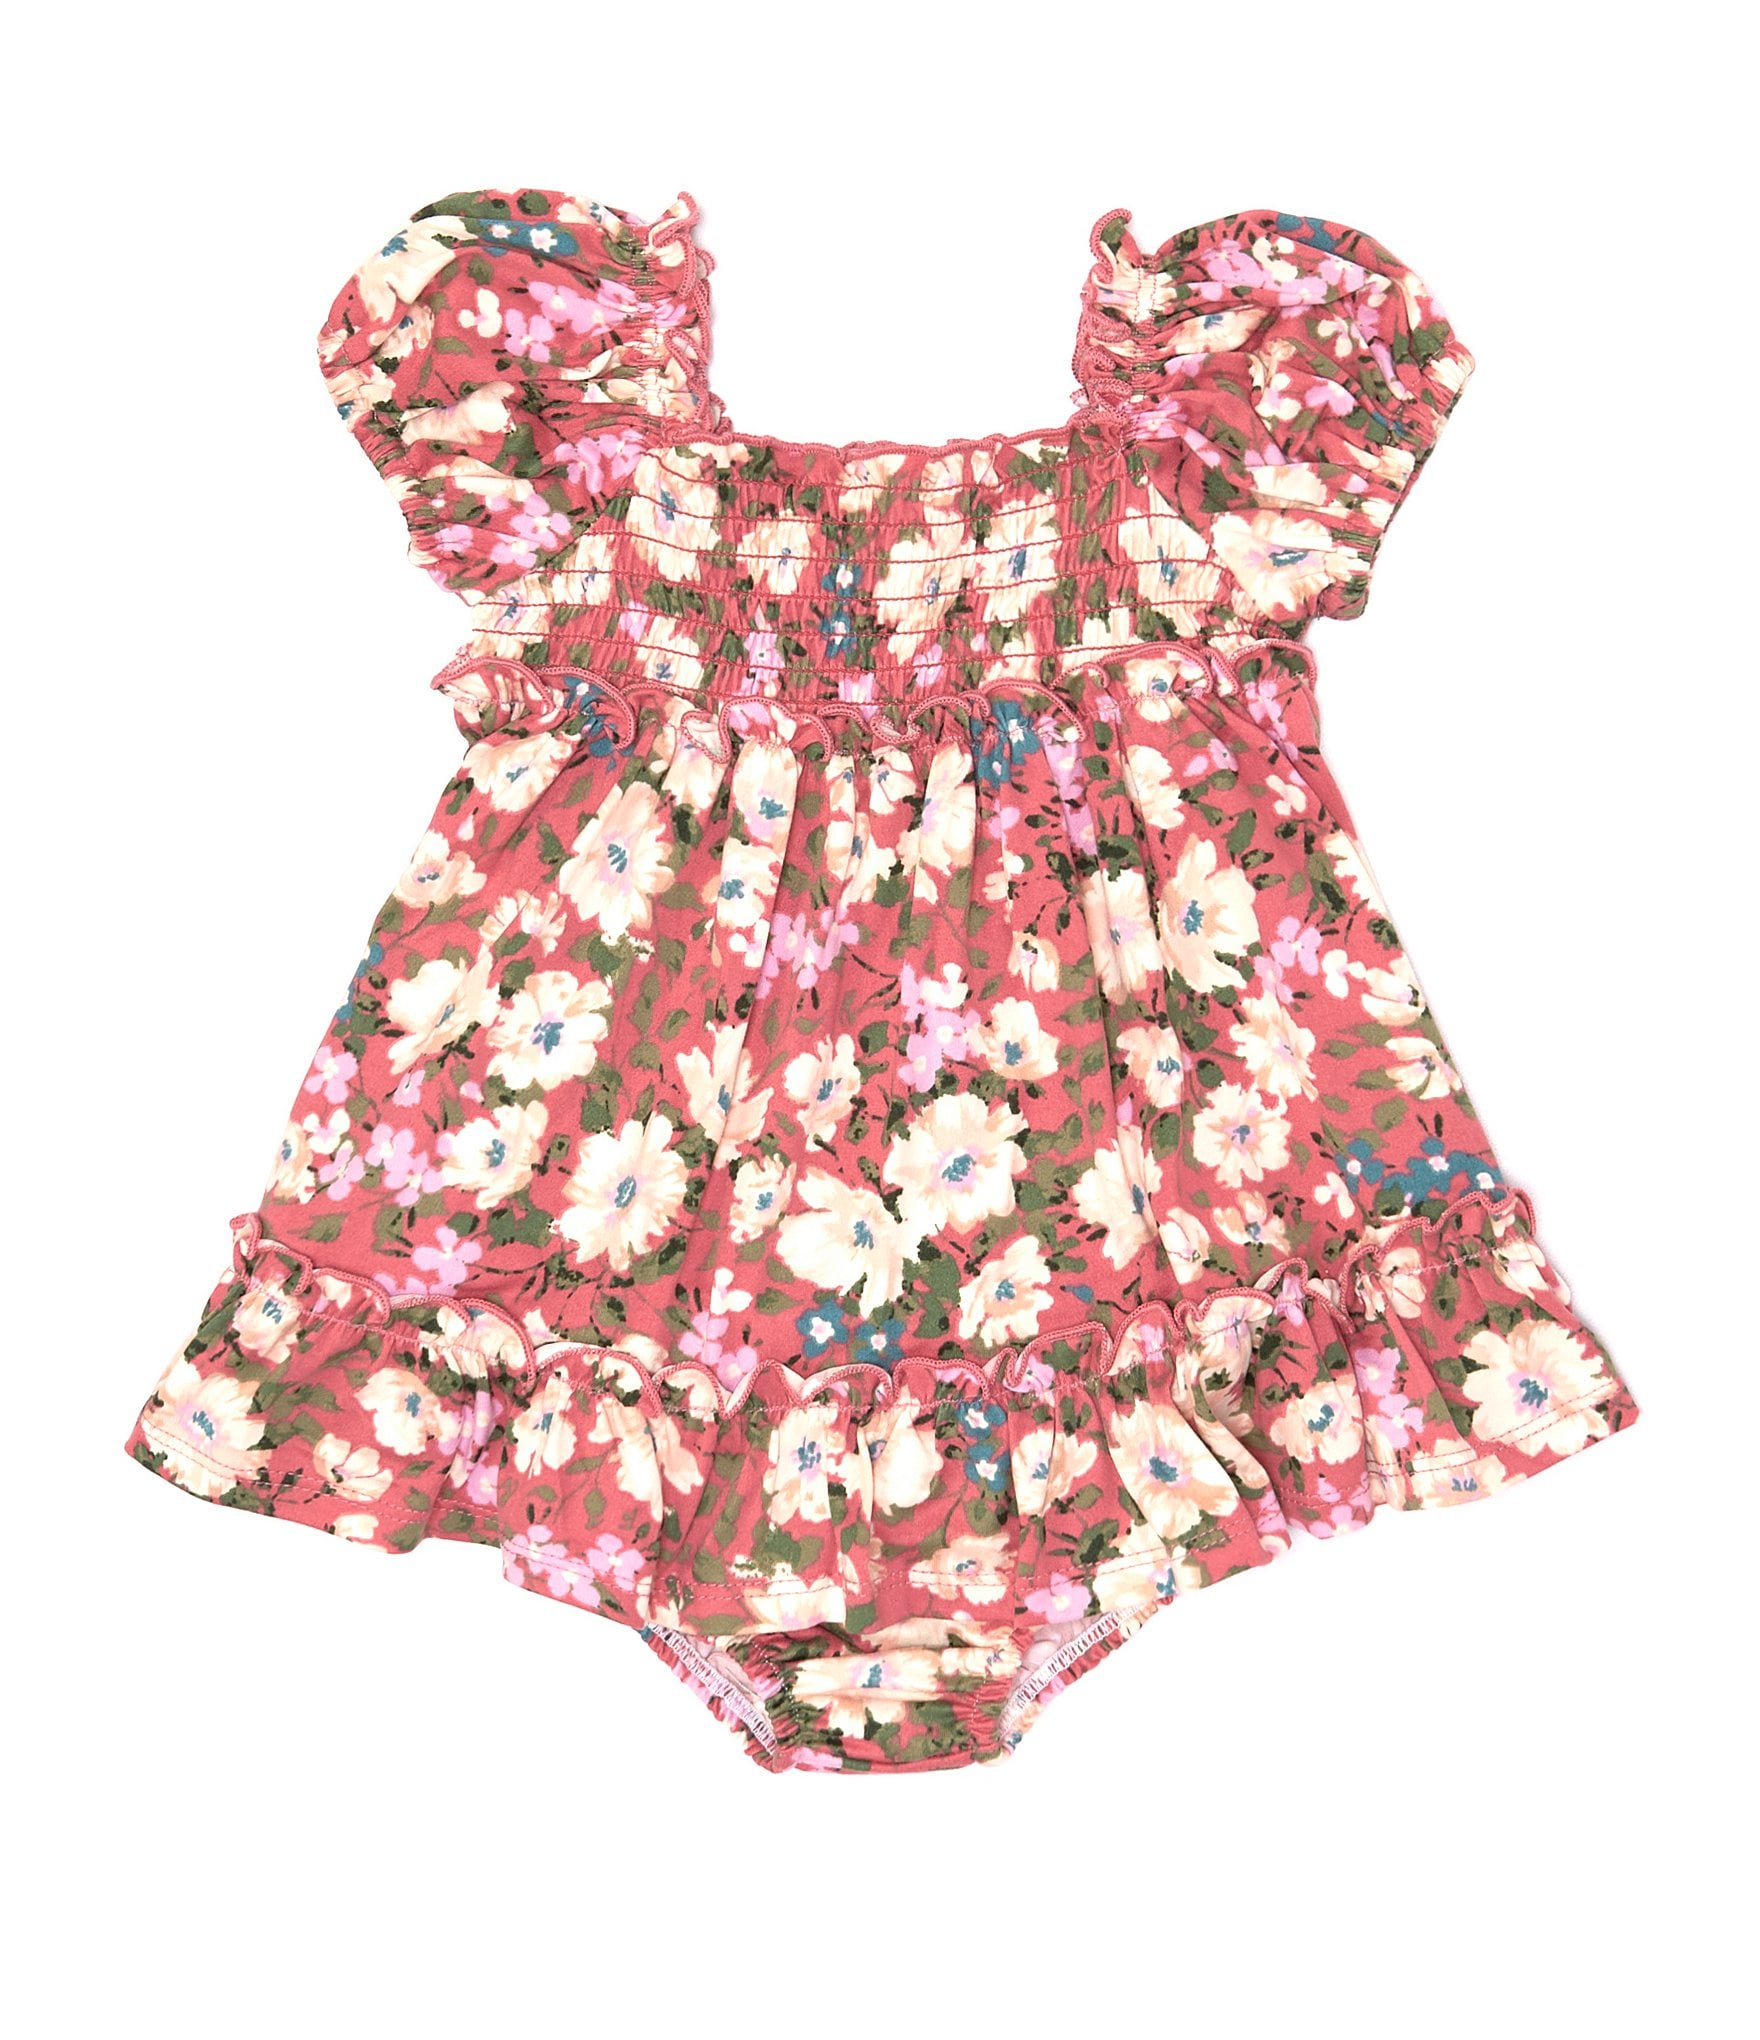 Friedknit Creations Baby Girls 12-24 Months Floral Printed Smocked Dress